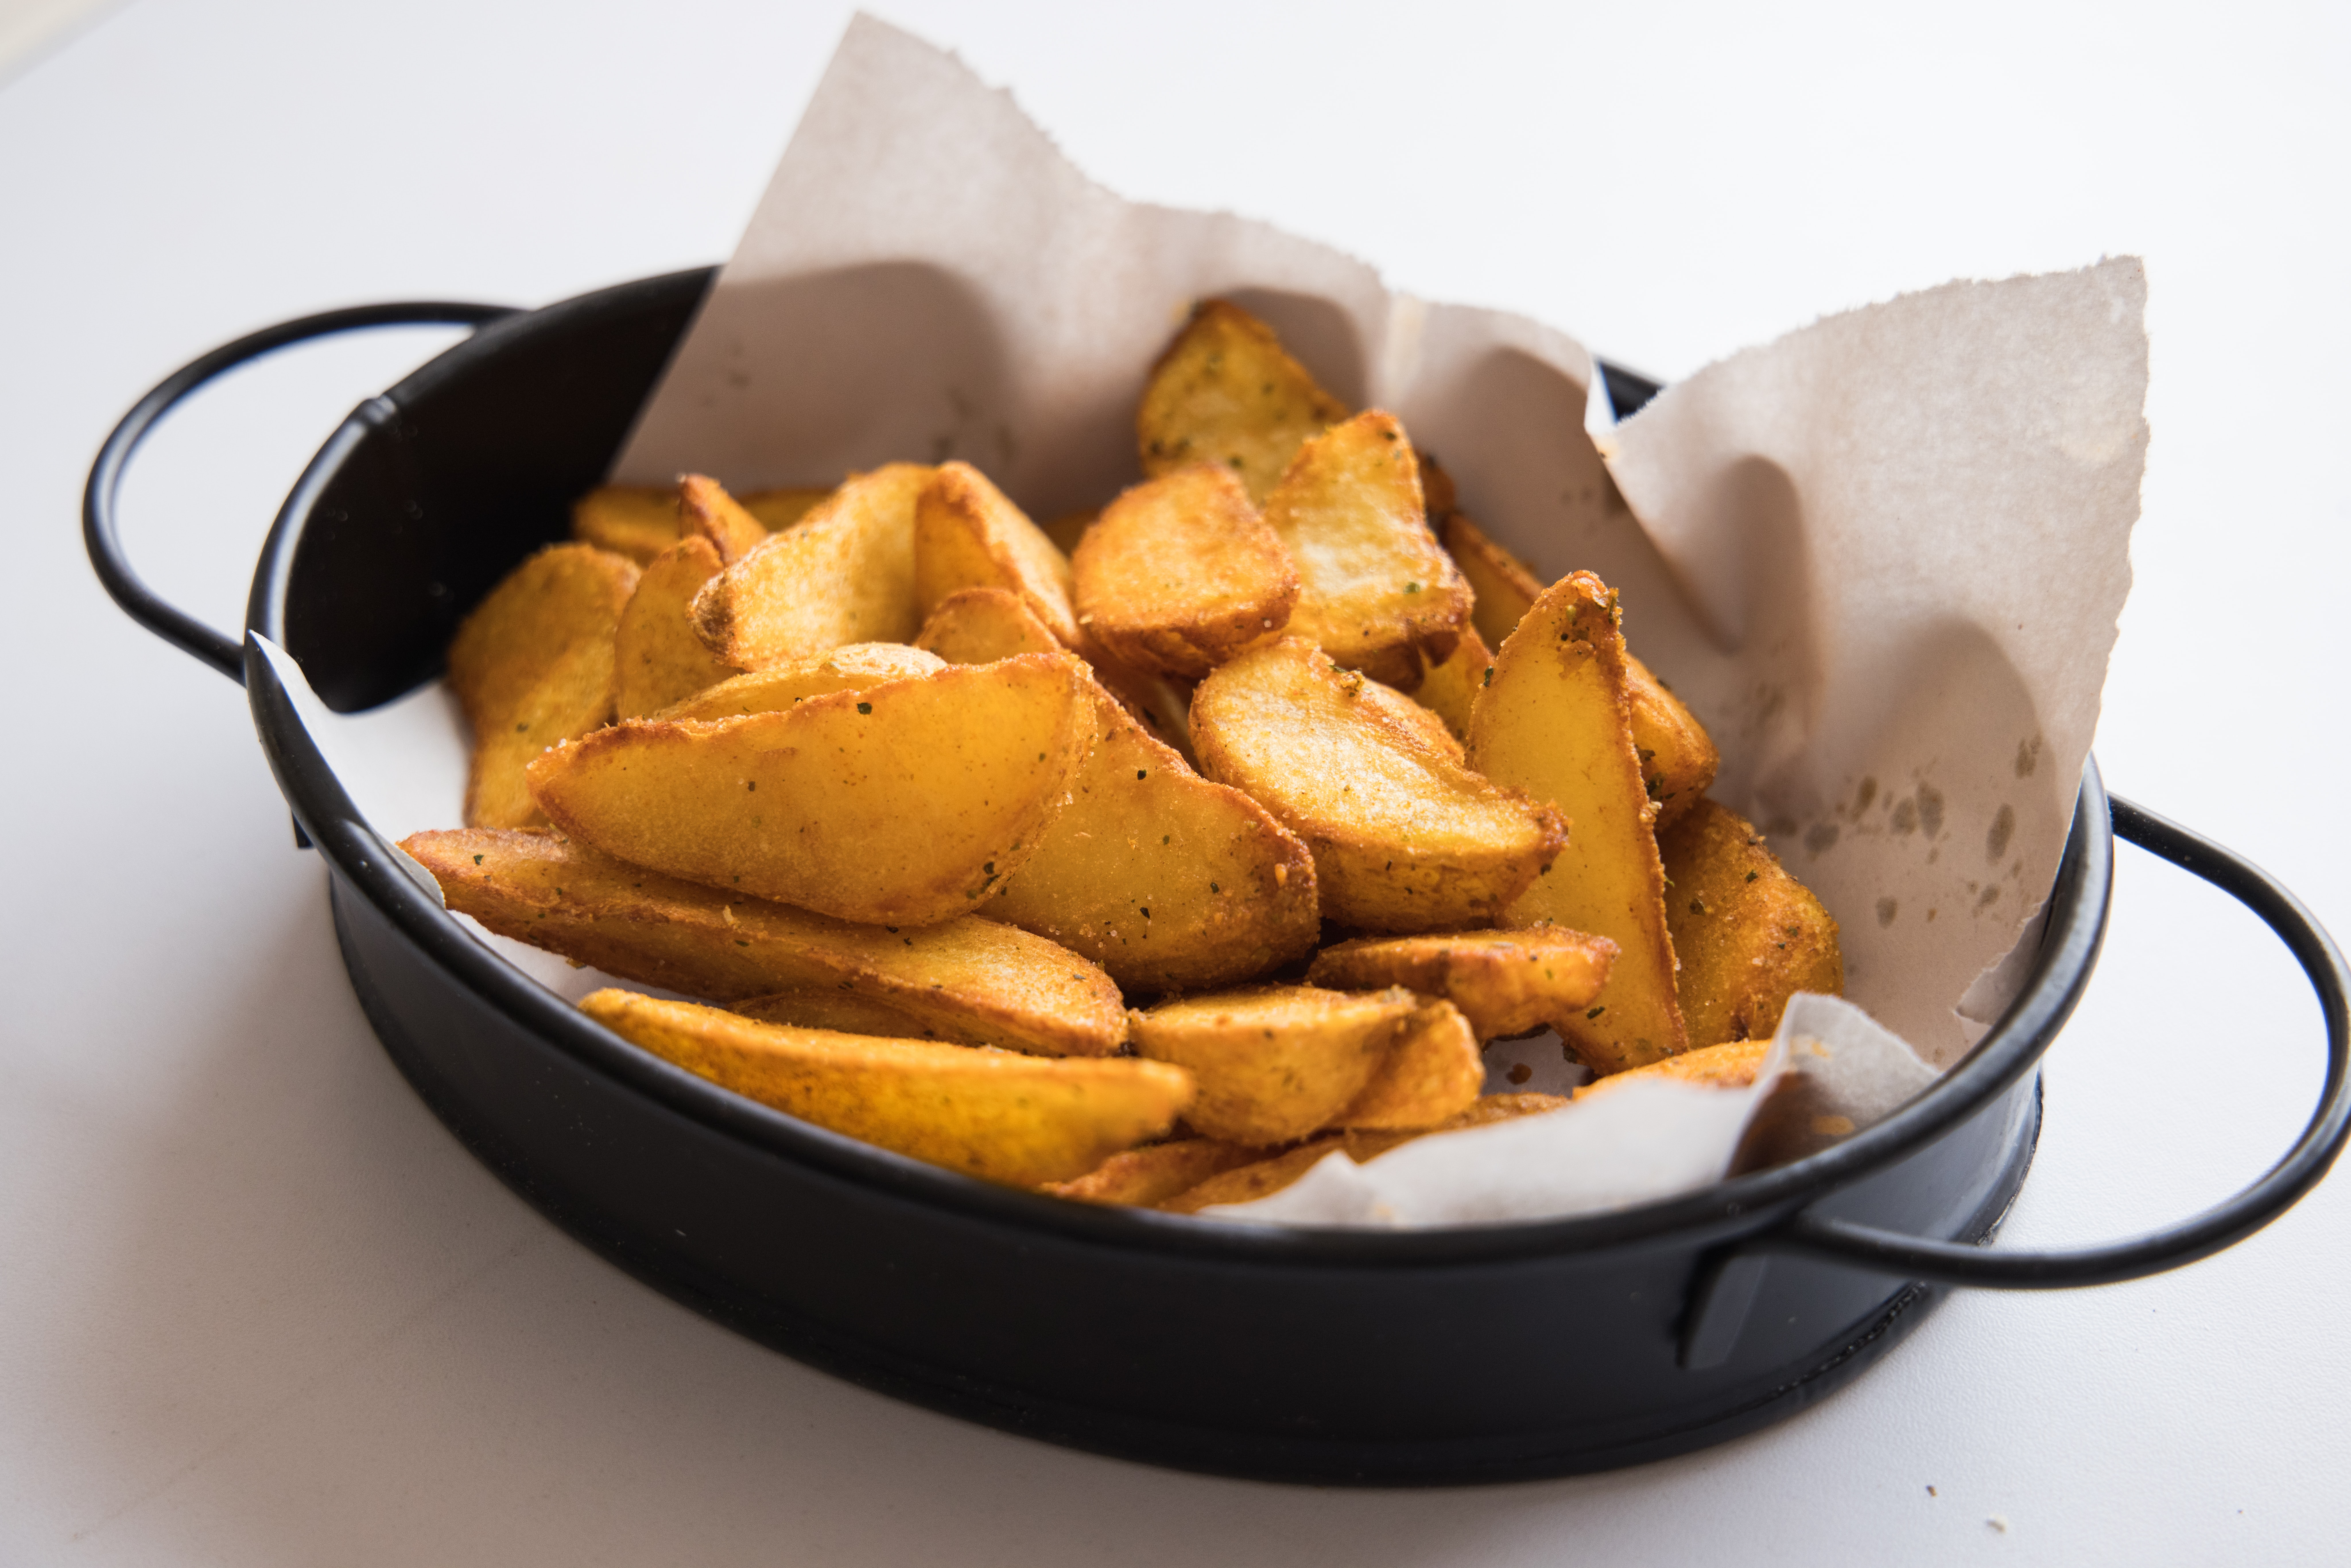 How Long To Cook Frozen Fries In Air Fryer